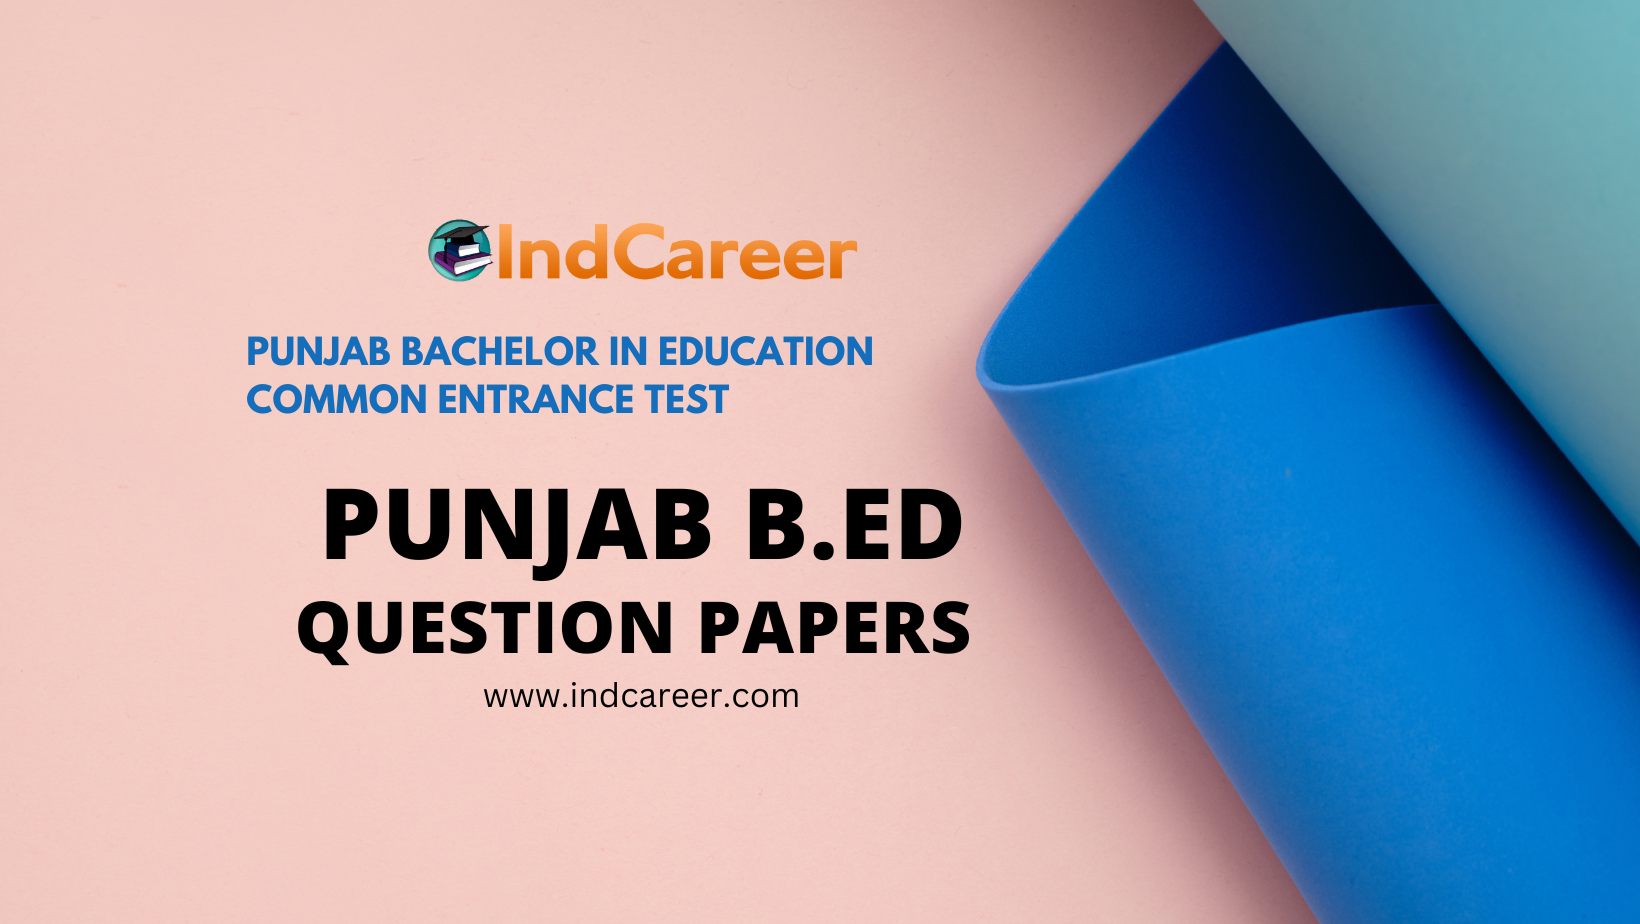 Punjab B.Ed Question Papers